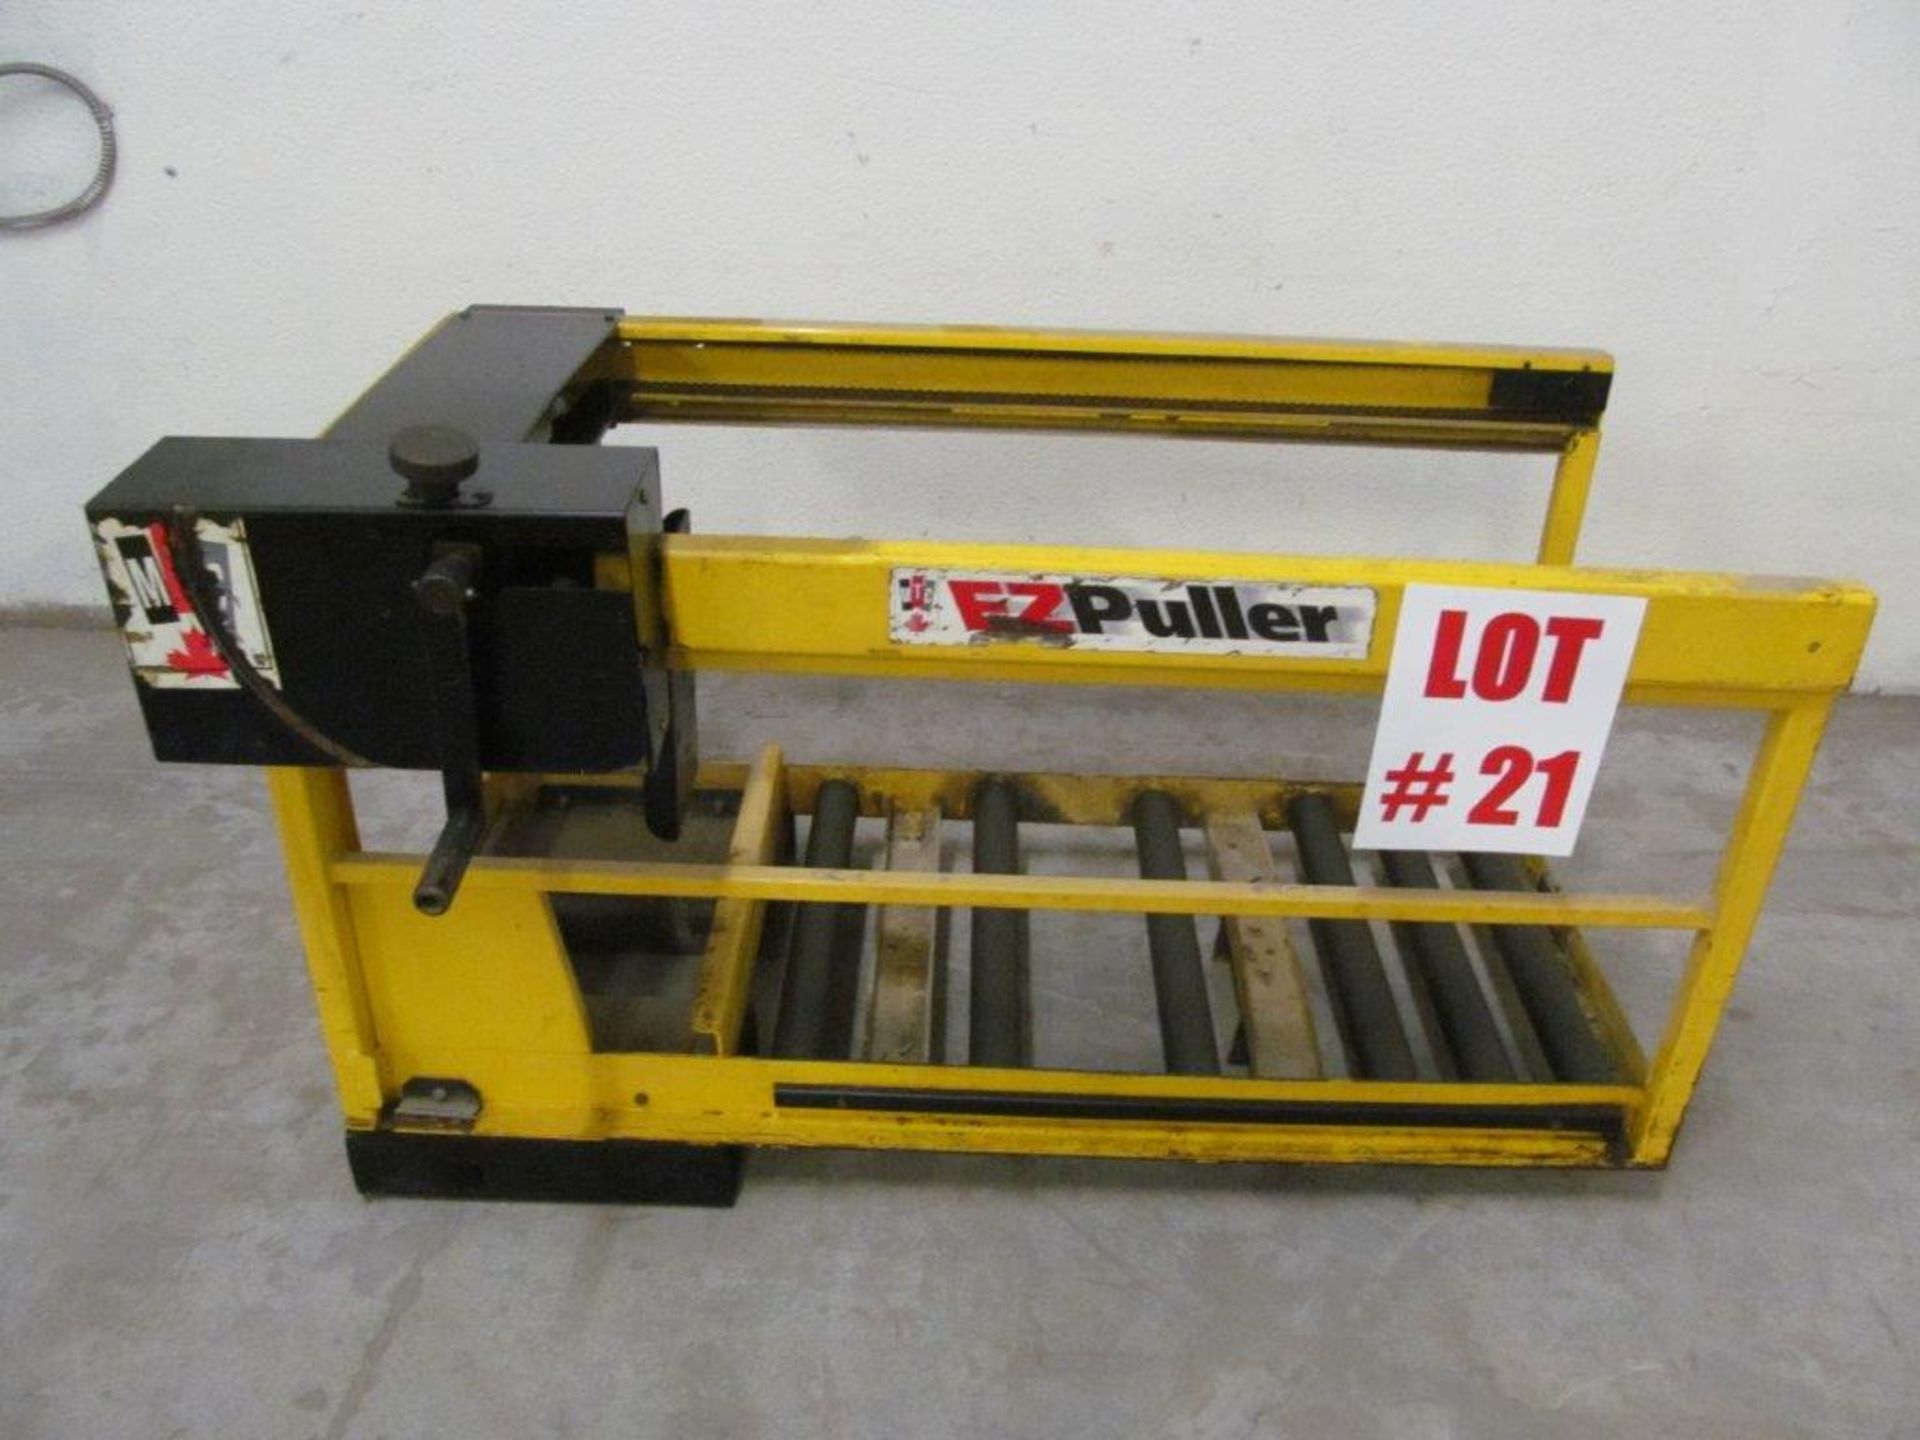 EZ PULLER ELECTRIC BATTERY DISCHARGE STATION